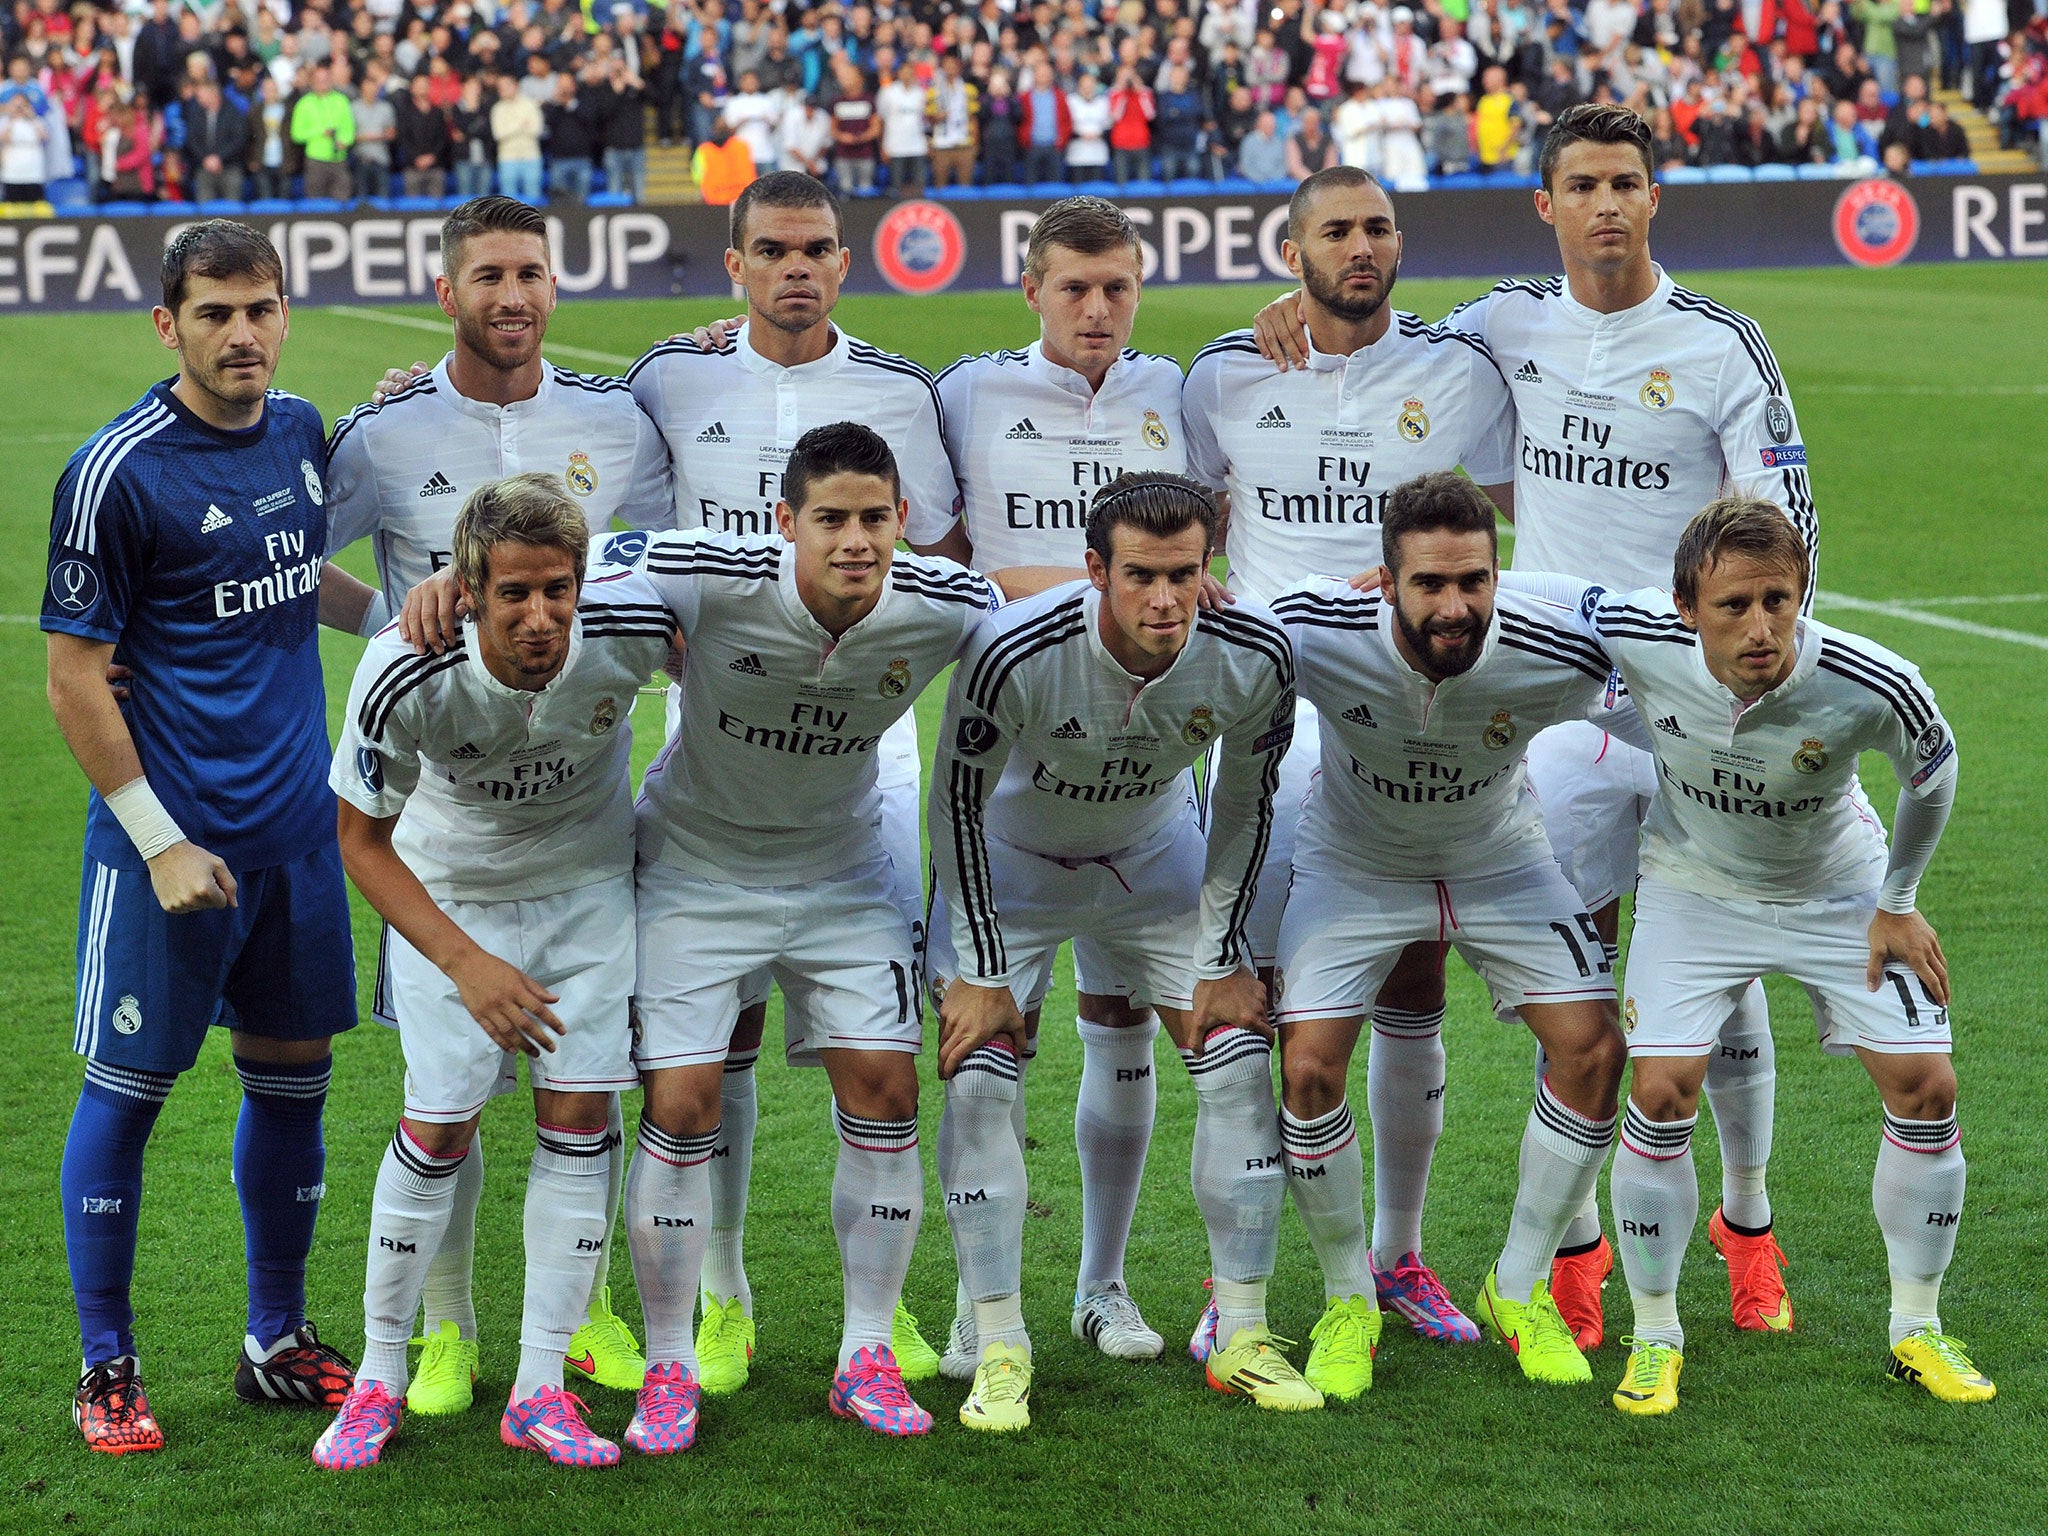 Cristiano Ronaldo stands tall at the back of Real Madrid's team pose